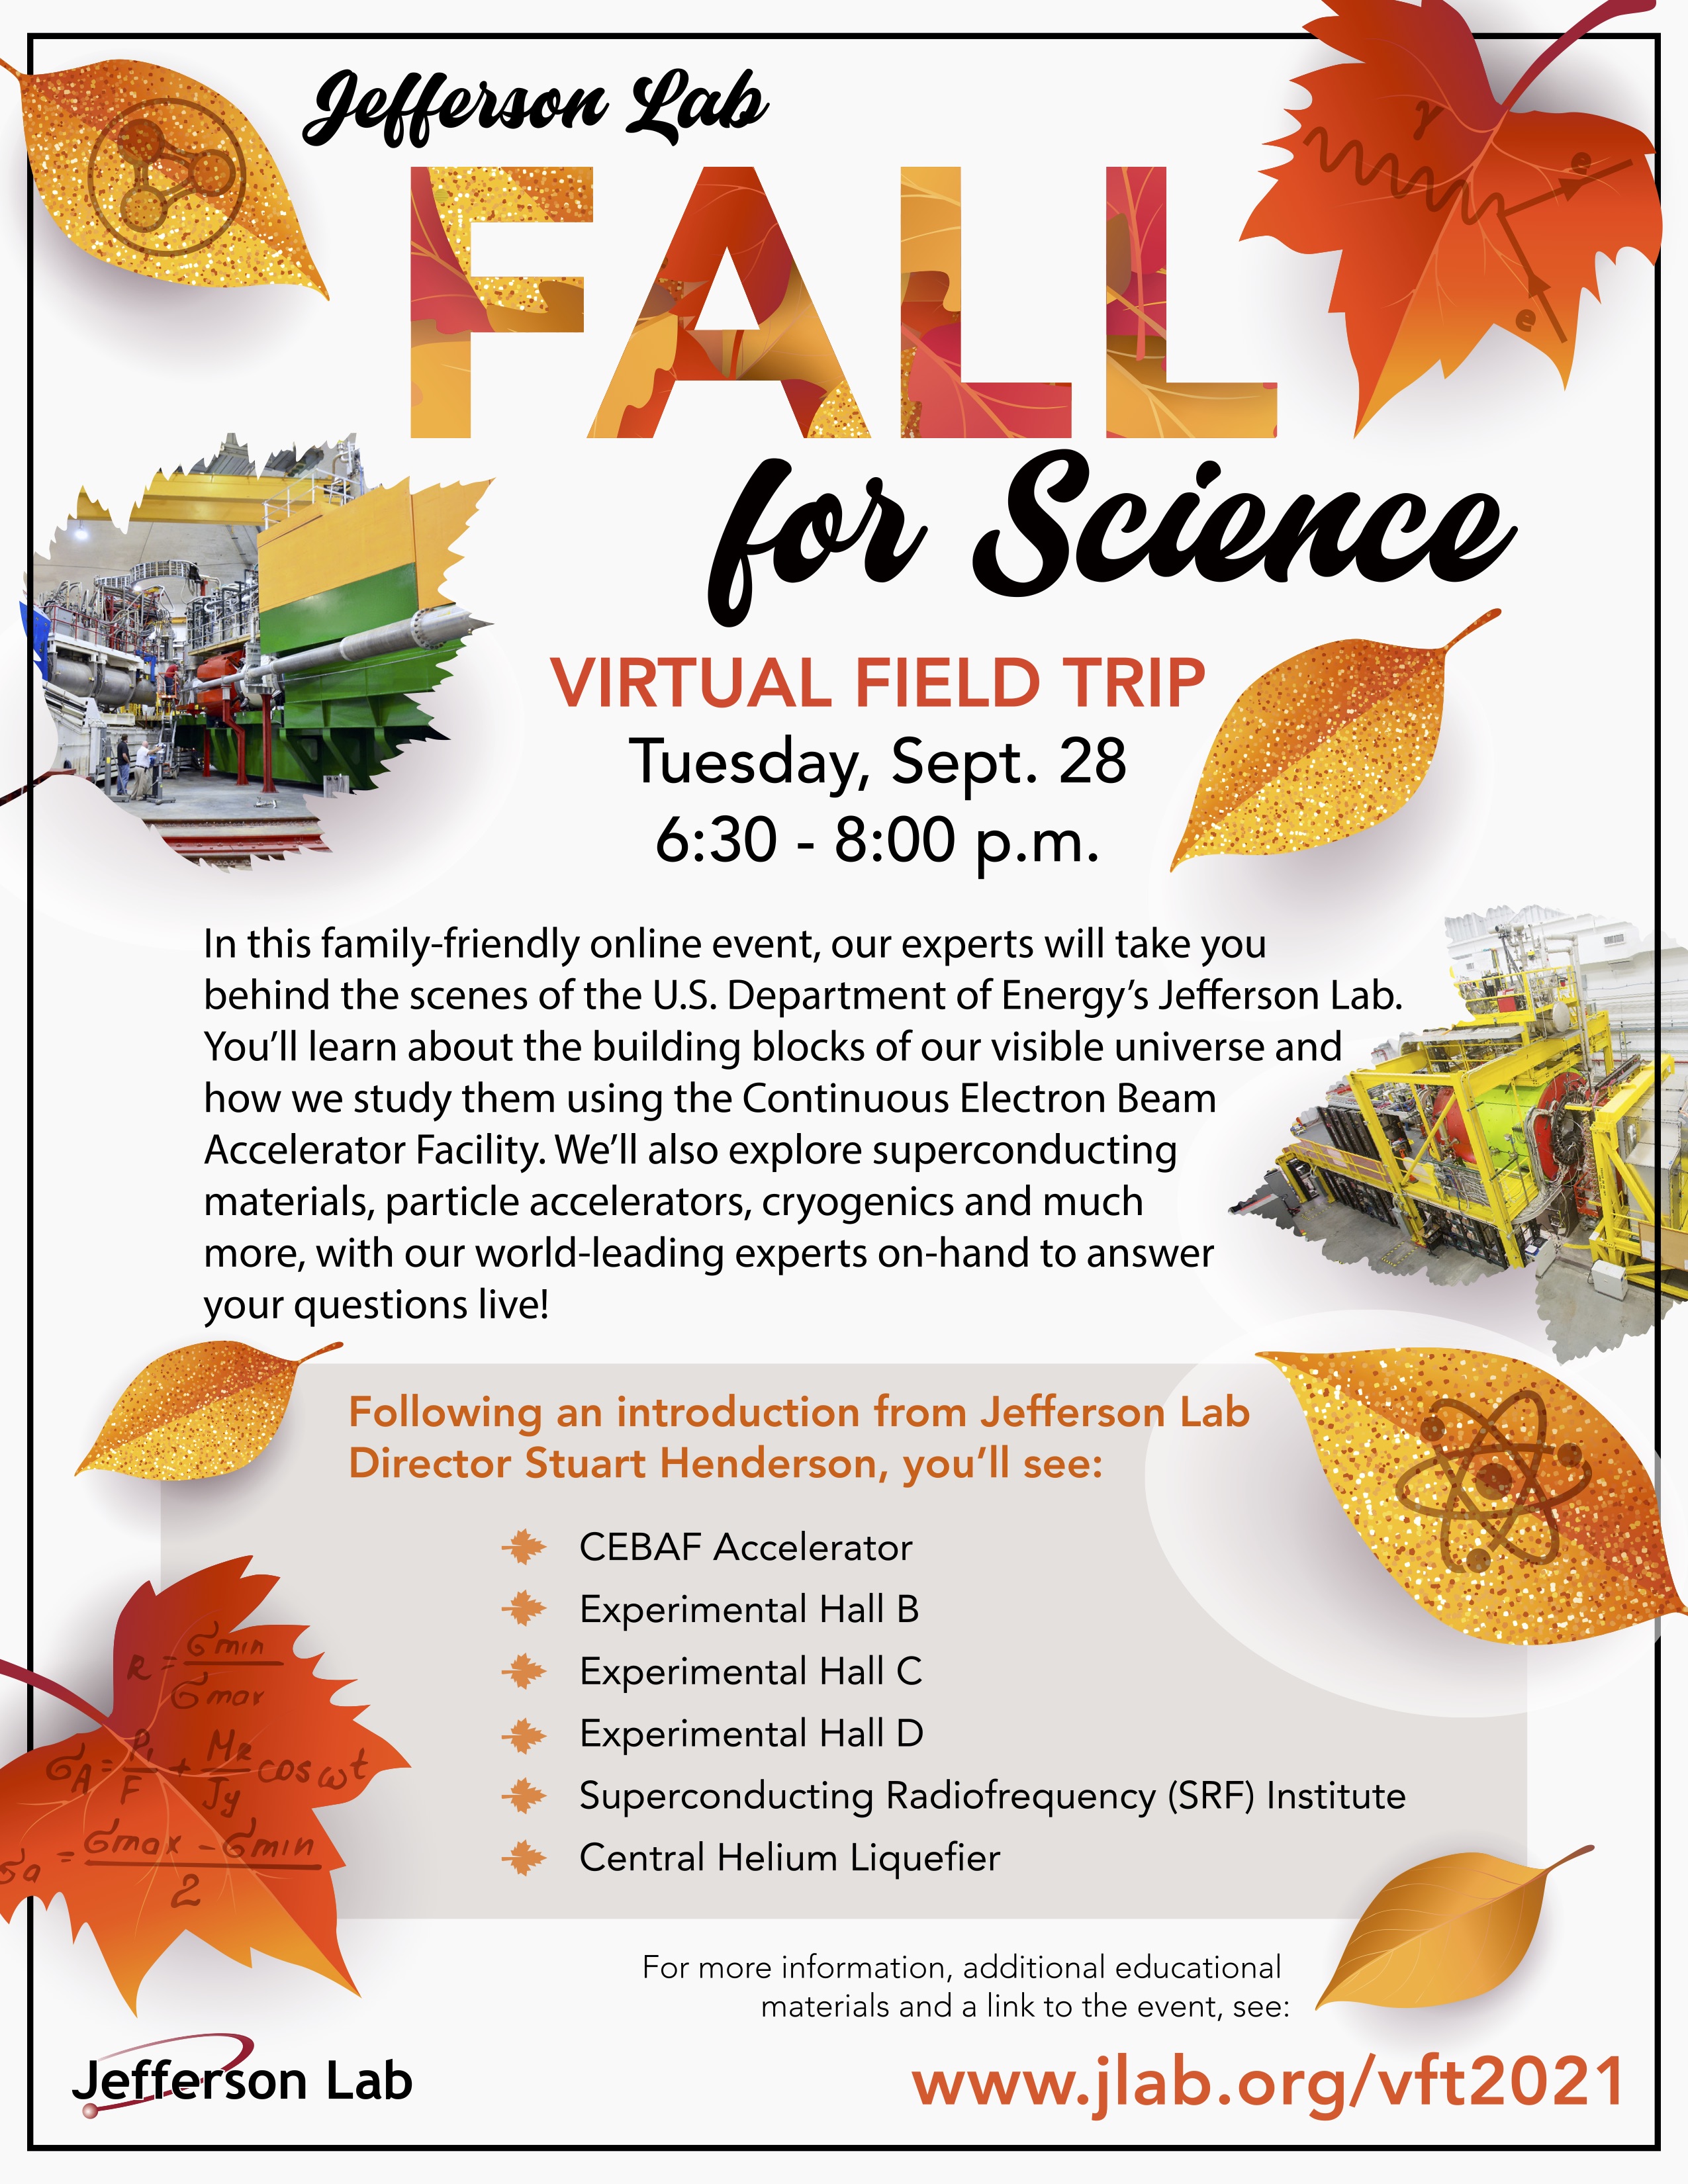 Fall for Science - Virtual Field Trip Event scheduled for Tuesday, Sept. 28 at 6:30 p.m.